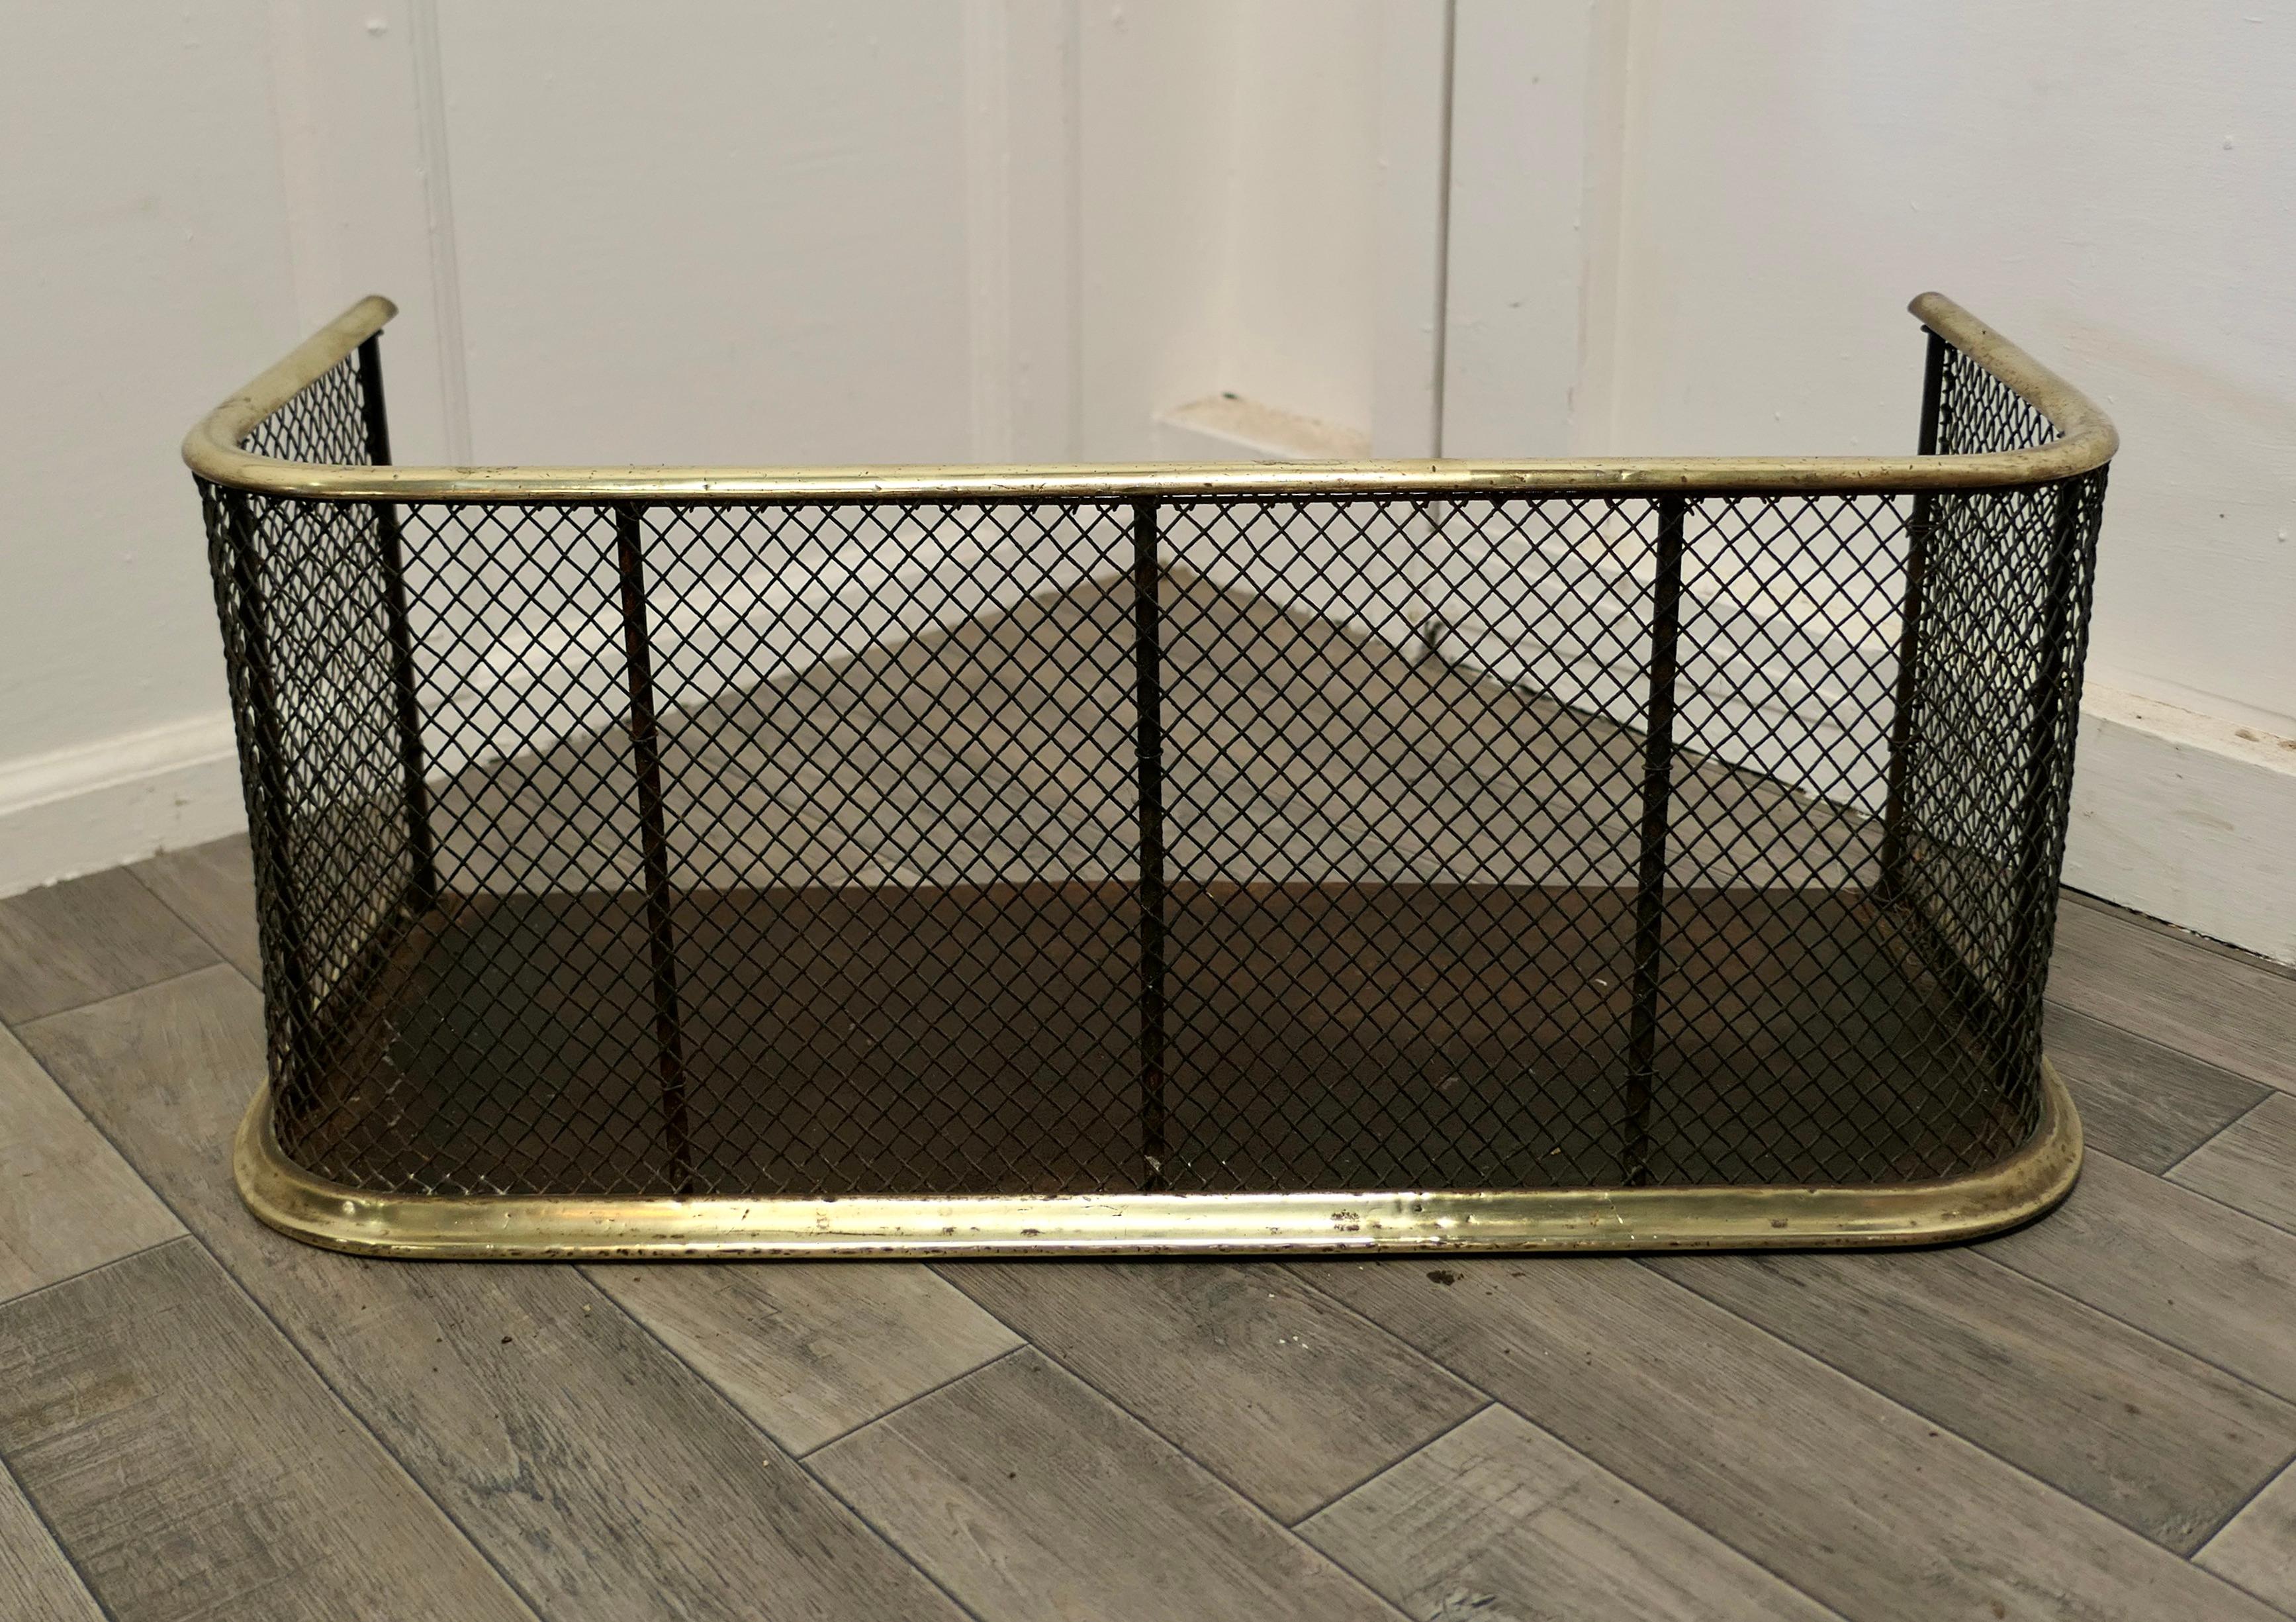 A Victorian brass and iron fender or fireguard.
 
A Victorian antique fire guard, the fender has heavy mesh with brass rails top and bottom and the fender is in good all round condition.
Measures: the fender is 12” high, 12” deep and 429” long.
 